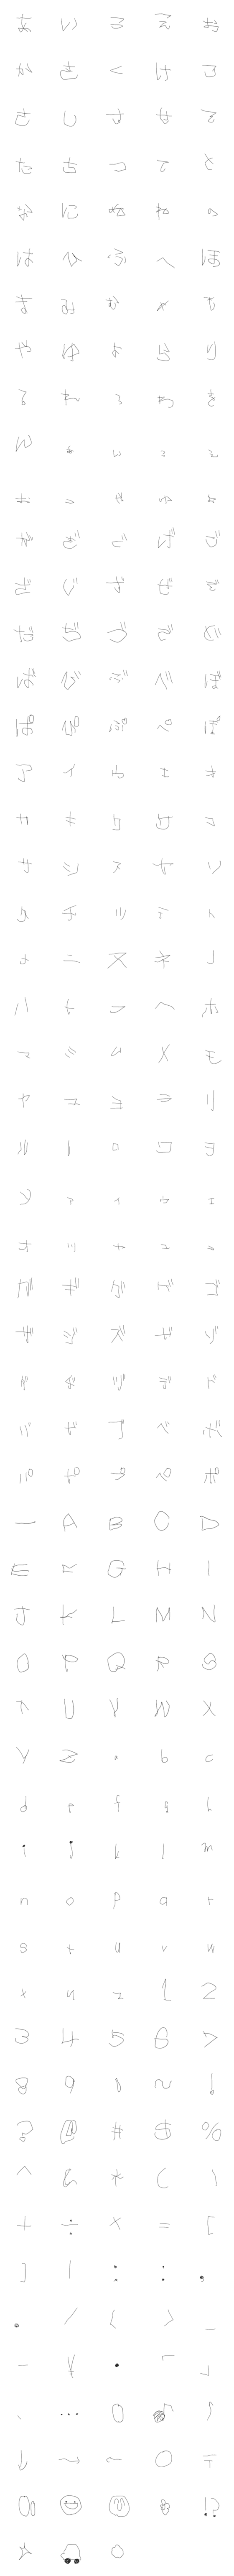 [LINE絵文字]子供フォント絵文字の画像一覧